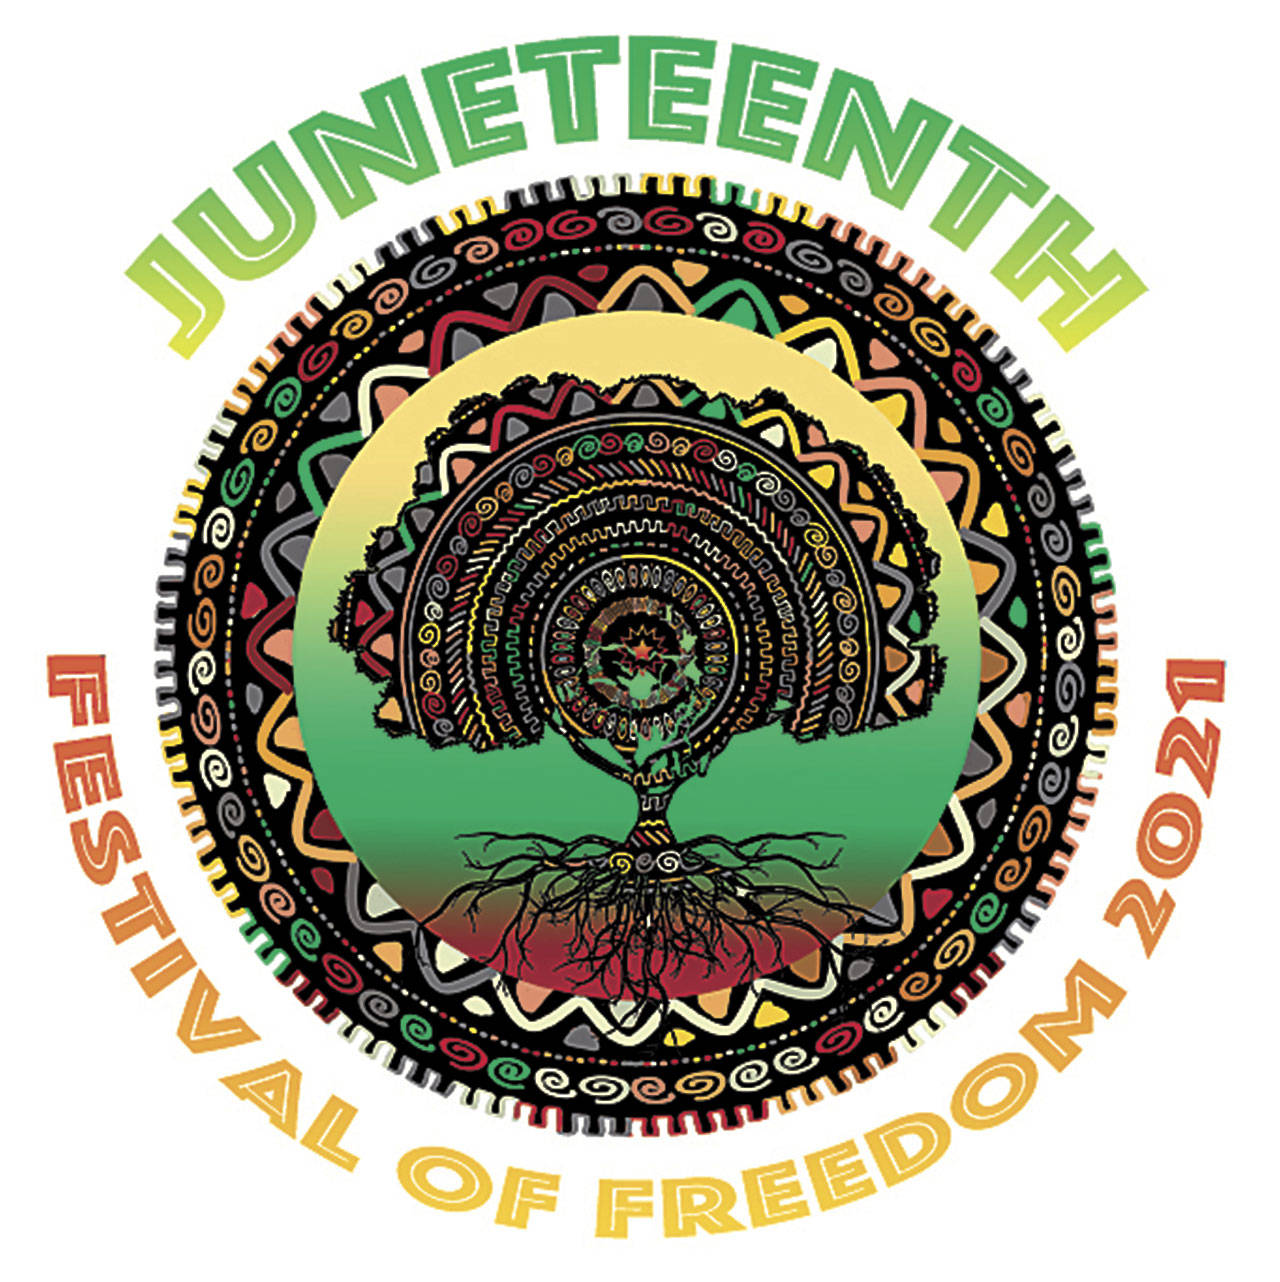 There are 21 events recognizing Juneteenth, a holiday marking the end of slavery in the United States of America first celebrated June 19, 1866, across Snohomish County this year. (NAACP Snohomish County)